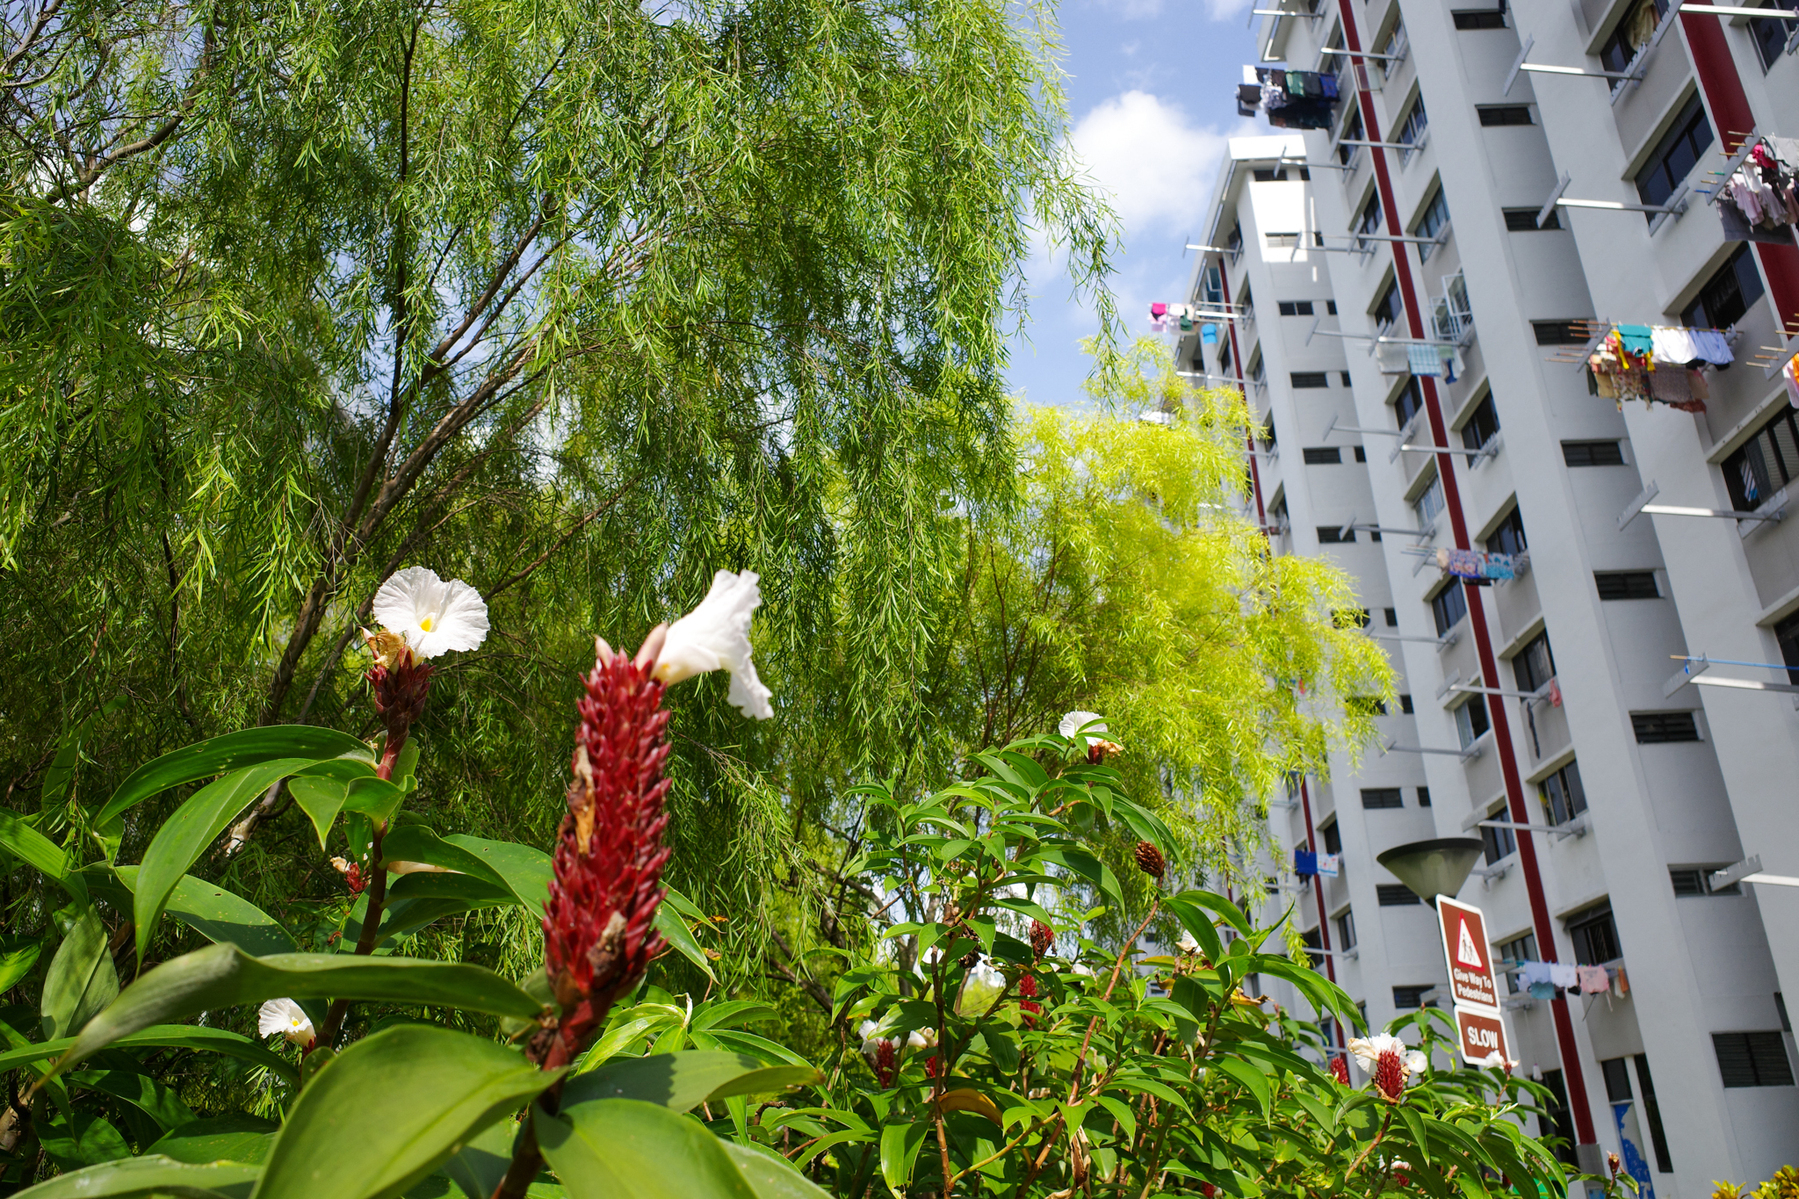 a color photograph of some tropical plants in the foreground and red and white colored apartments in the background